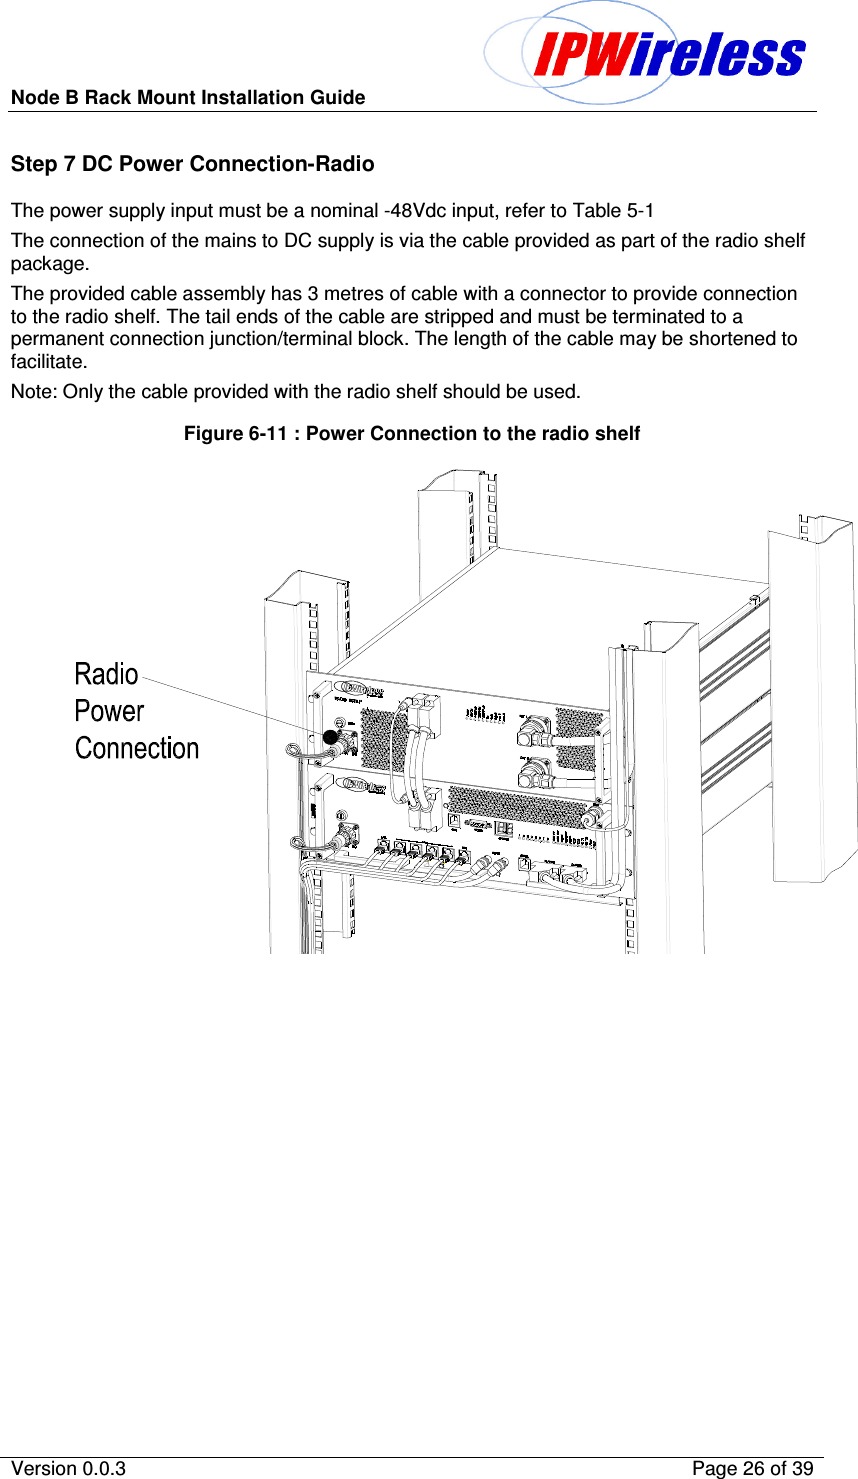 Node B Rack Mount Installation Guide                          Version 0.0.3    Page 26 of 39  Step 7 DC Power Connection-Radio The power supply input must be a nominal -48Vdc input, refer to Table 5-1 The connection of the mains to DC supply is via the cable provided as part of the radio shelf package. The provided cable assembly has 3 metres of cable with a connector to provide connection to the radio shelf. The tail ends of the cable are stripped and must be terminated to a permanent connection junction/terminal block. The length of the cable may be shortened to facilitate. Note: Only the cable provided with the radio shelf should be used. Figure 6-11 : Power Connection to the radio shelf                                                                   